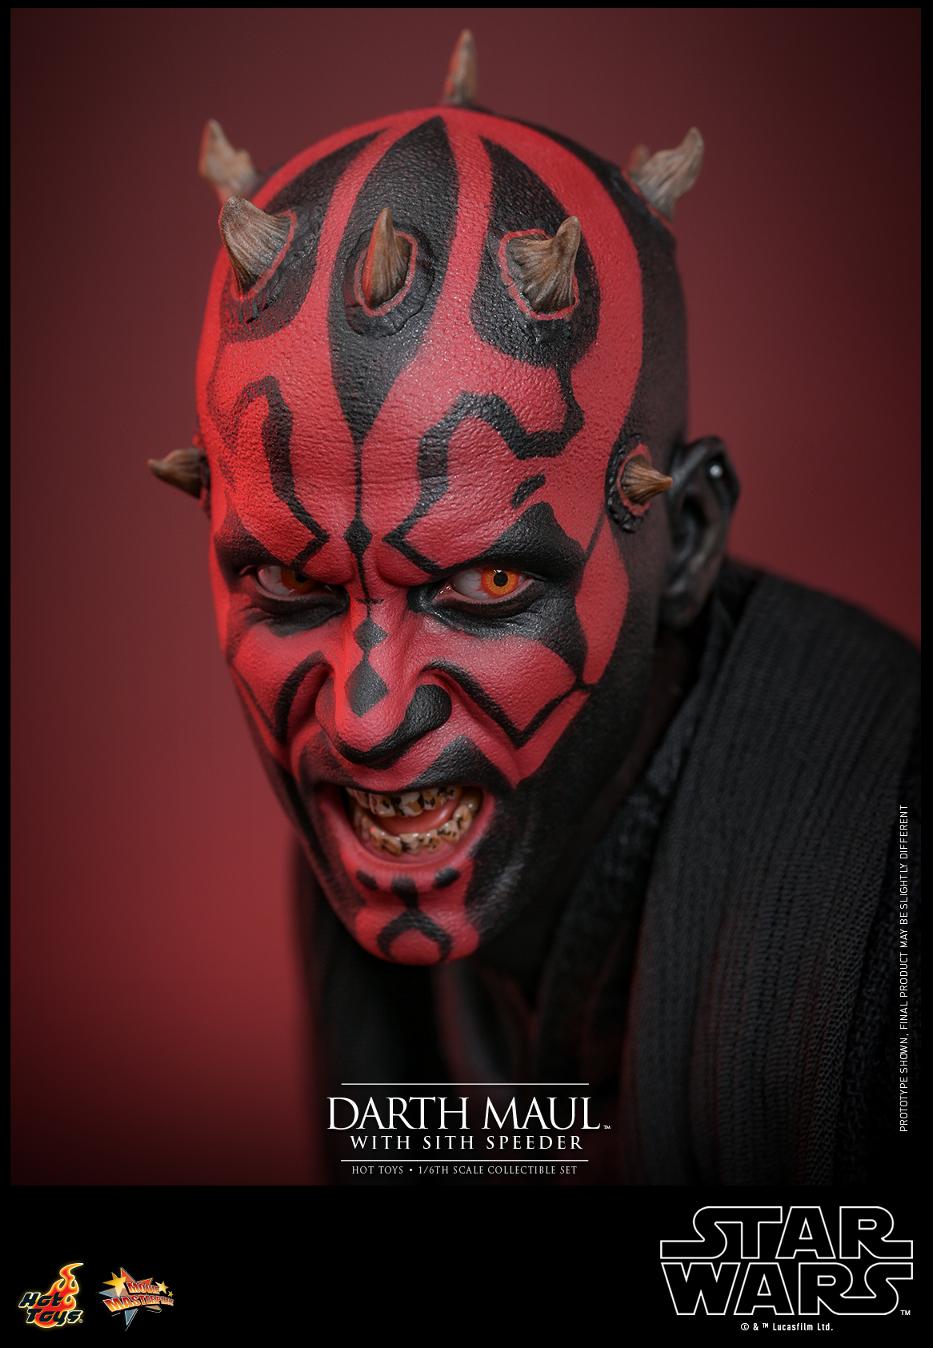 Darth Maul with Sith Speeder Collectible Set - Hot Toys Darth610